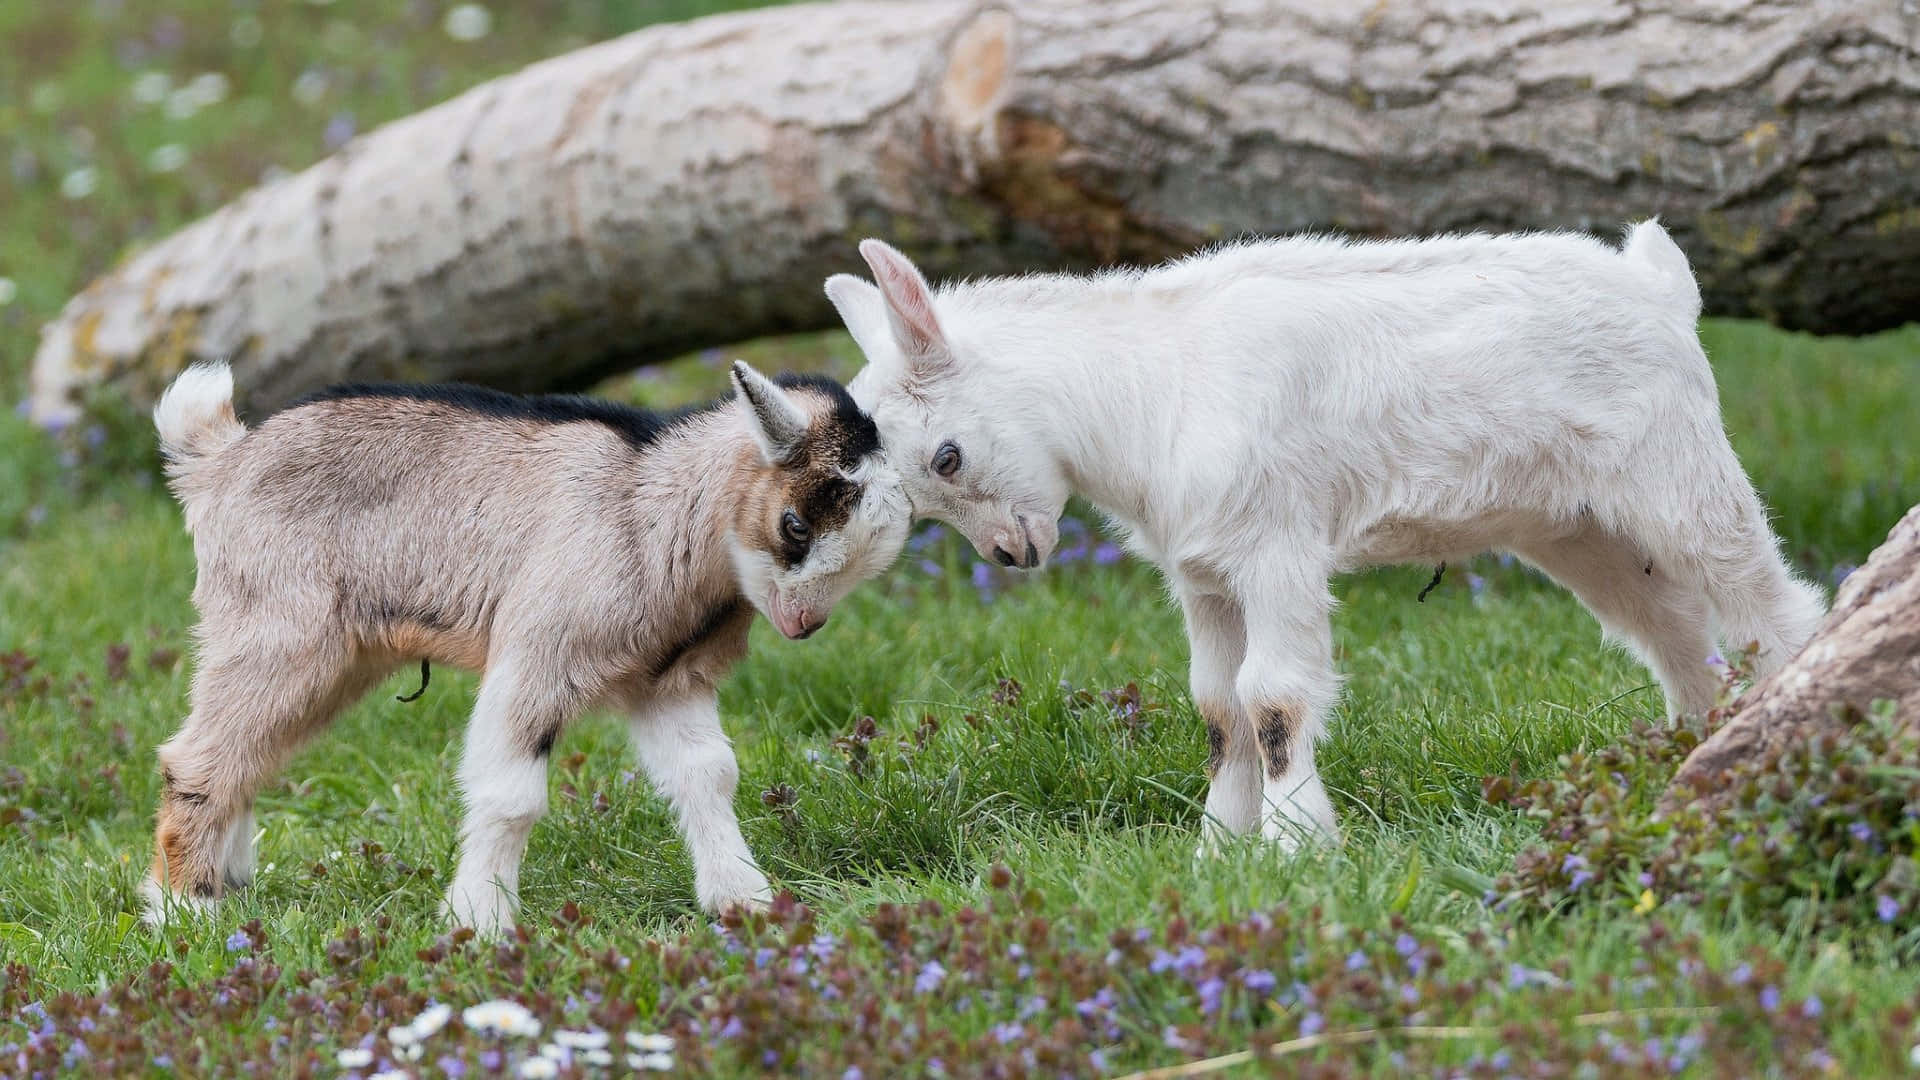 Short Funny Goat Fighting Picture